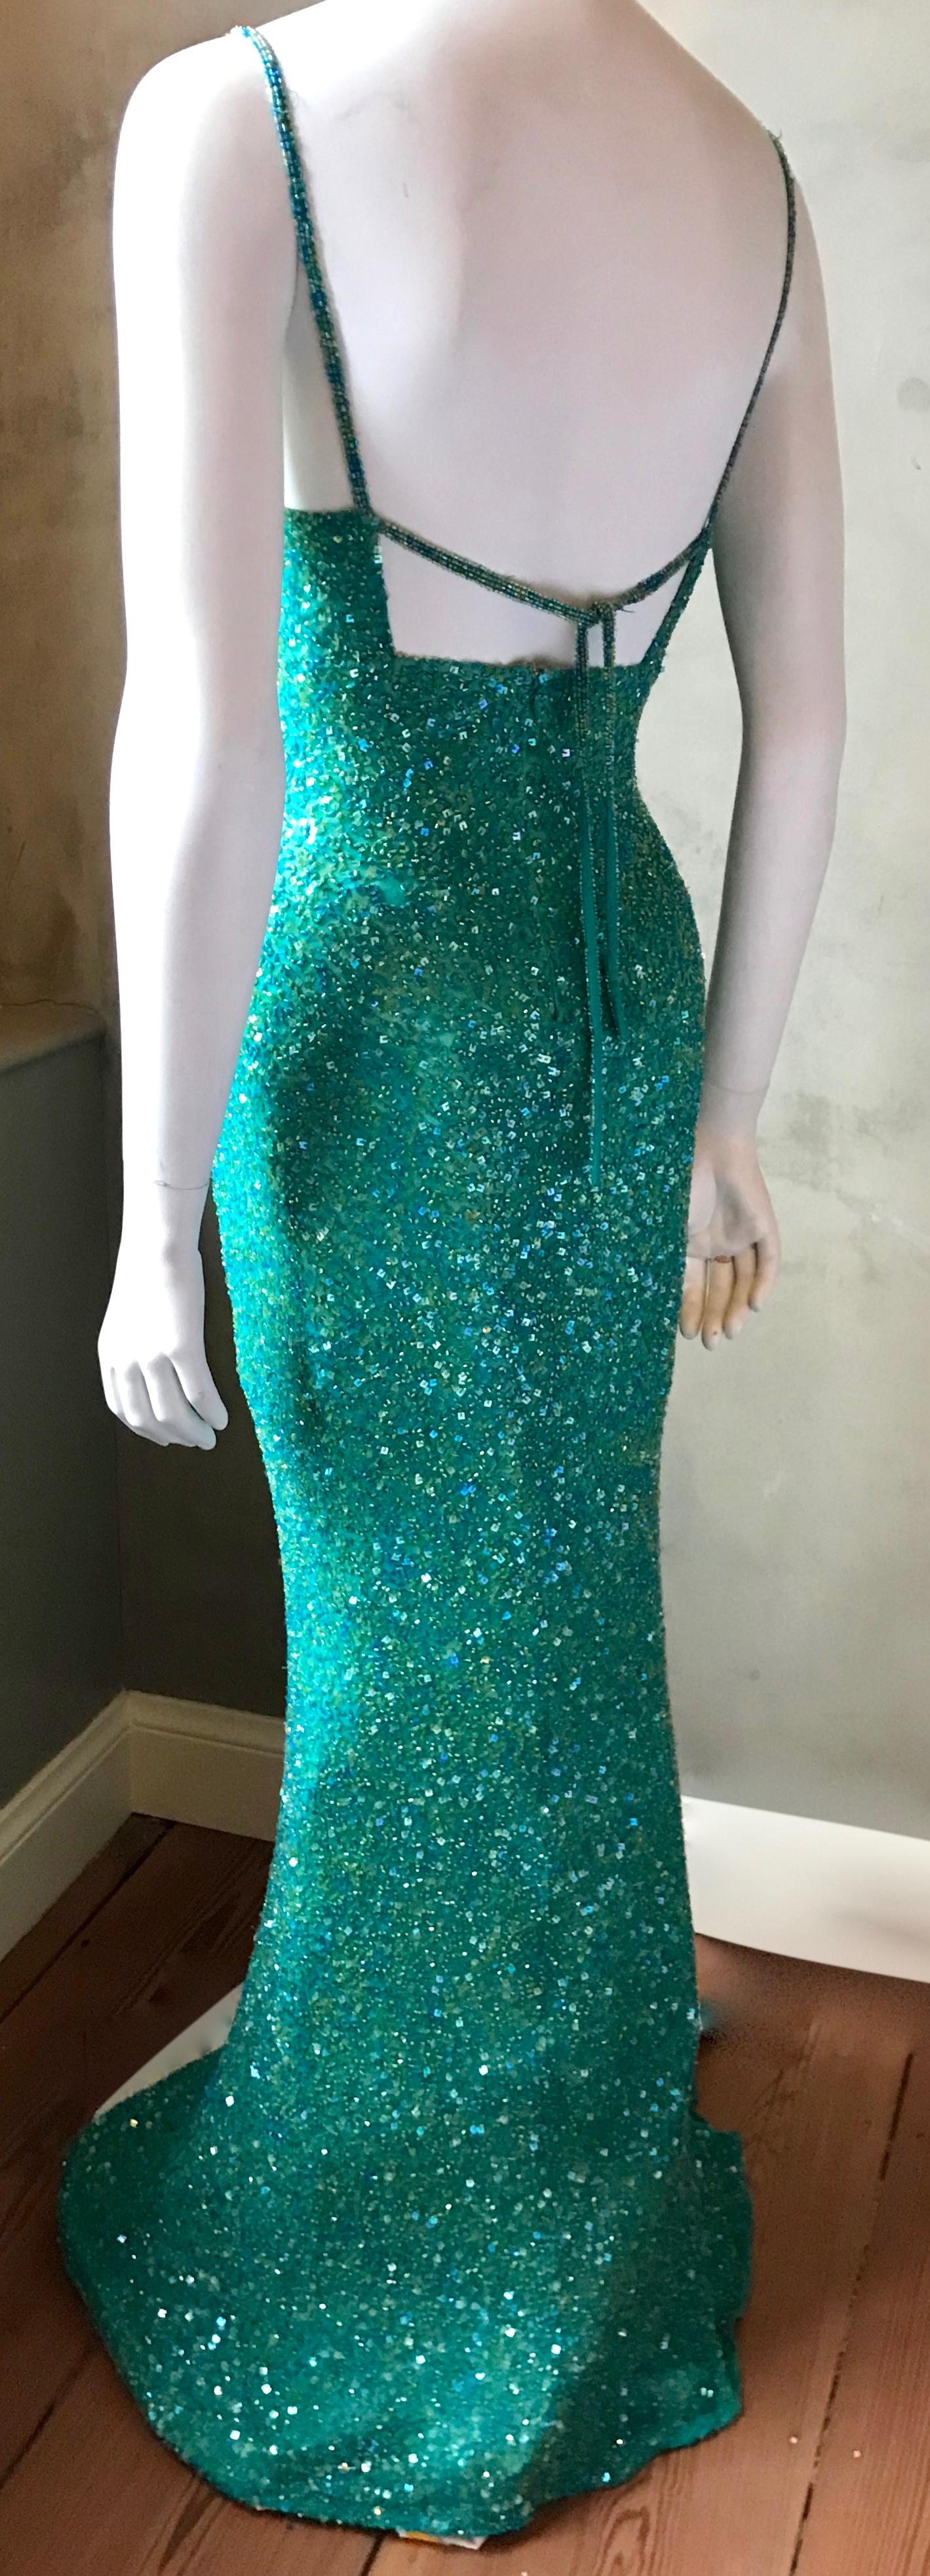 Full length 1980's Scala hand beaded silk gown. Absolutely striking opalescent teal/ /turquoise green chiffon silk covered in thousands of glass beads that are all sewn on by hand. Rich sexy and elegant style that Scala gowns are famous for.